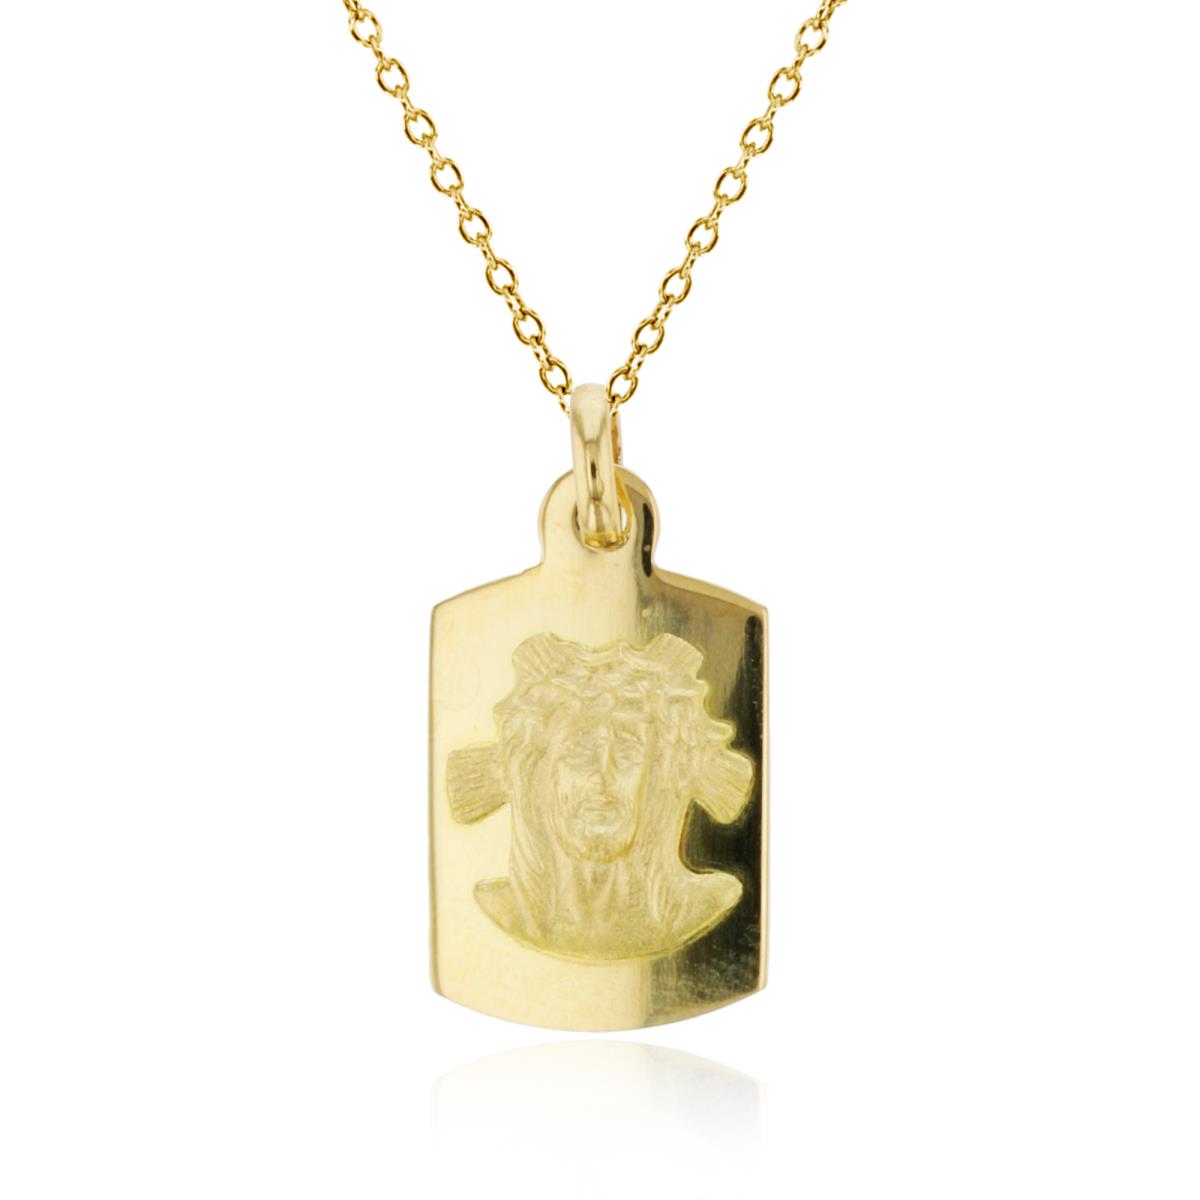 10K Yellow Gold High Polished Jesus Head 18" Necklace